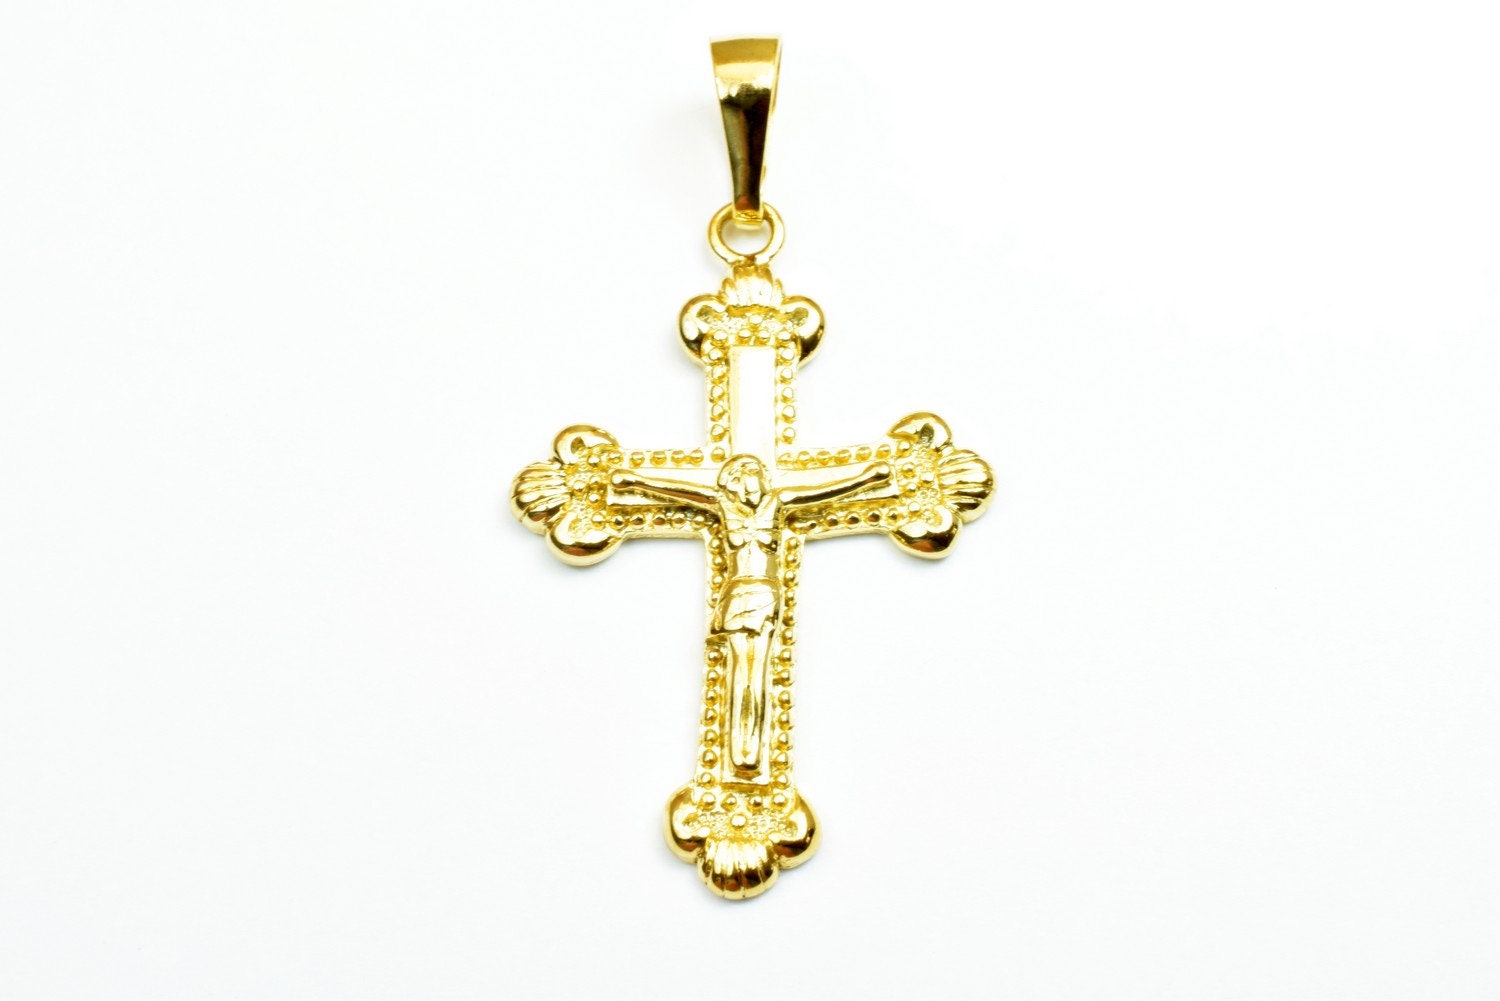 18K as Gold Filled* Cross Pendants Size 47x31mm, Christian Religious Cross Charm, First Communion Baby Baptism For Jewelry Making